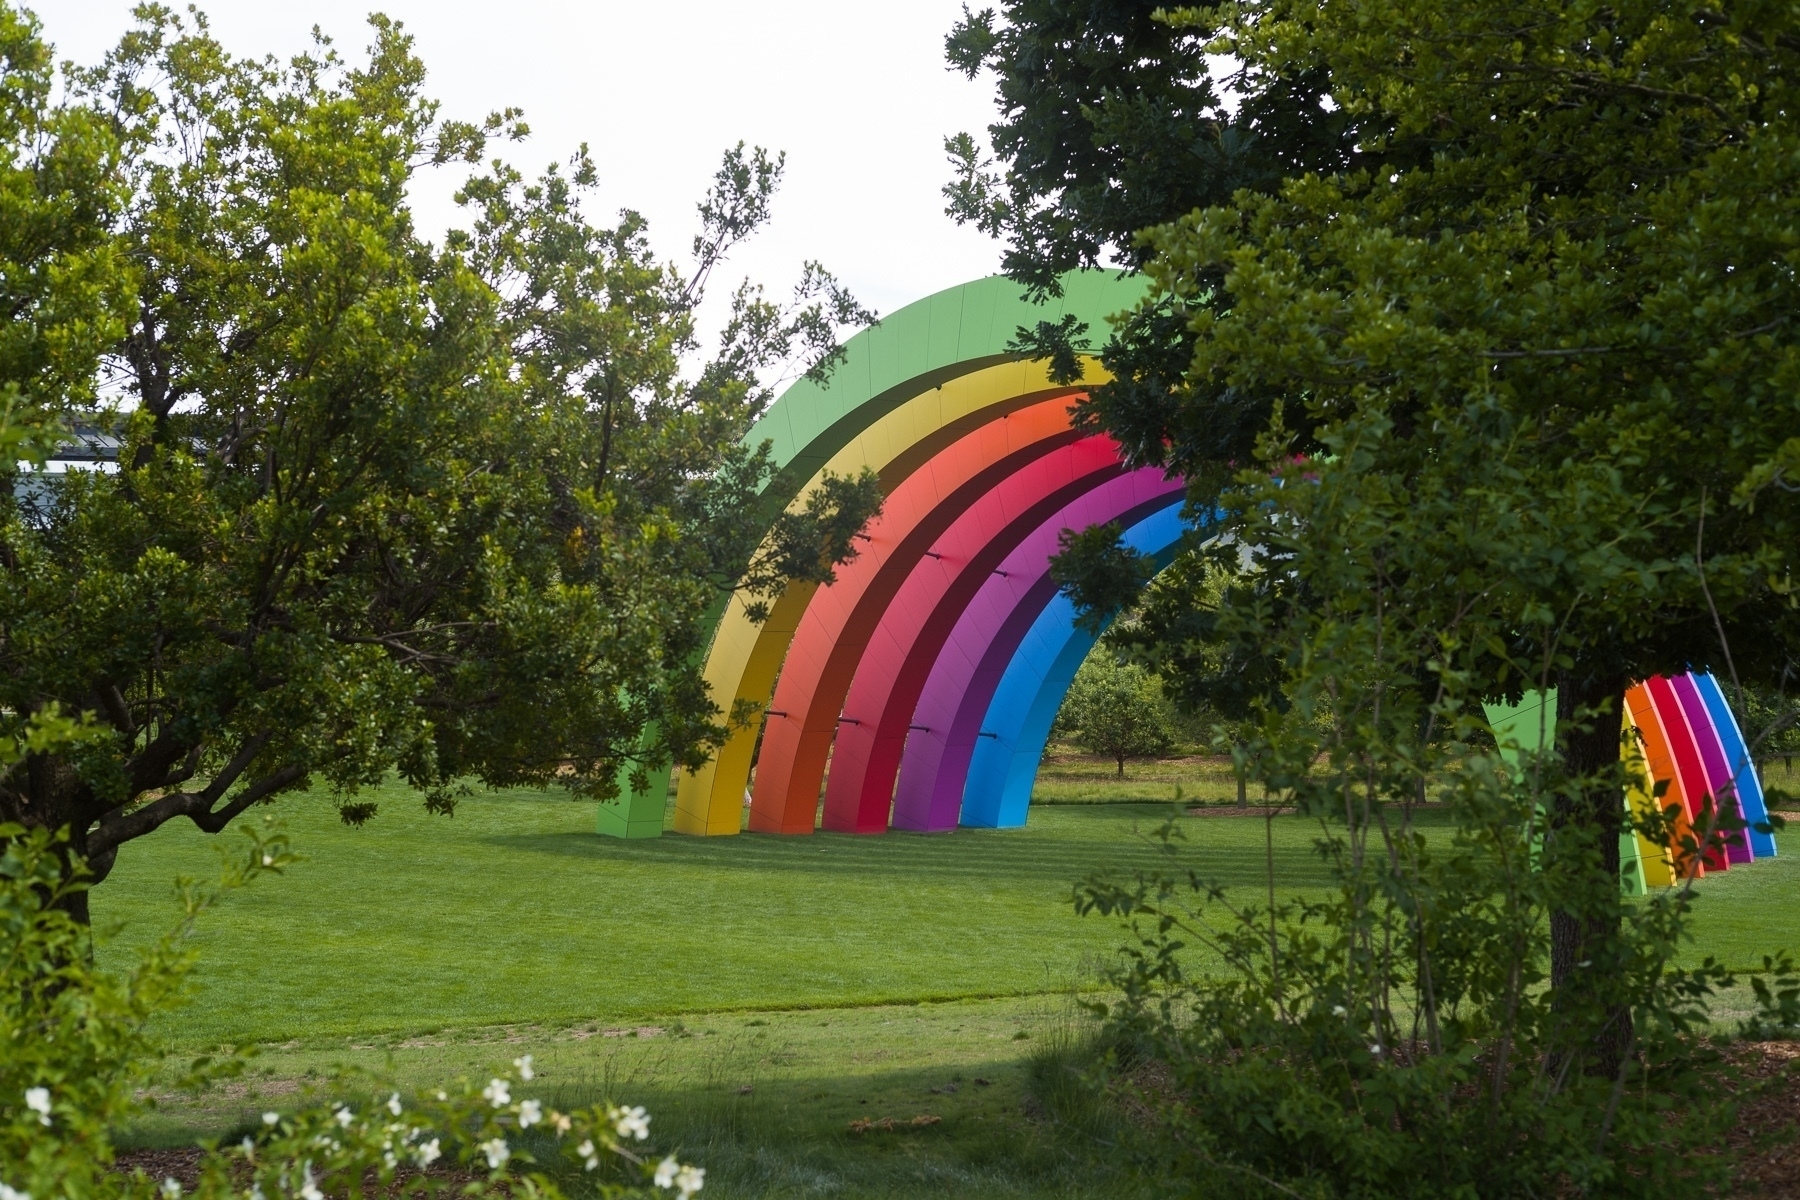 A set of rainbow colored arches are visible in the background with some trees and flowers in the foreground.